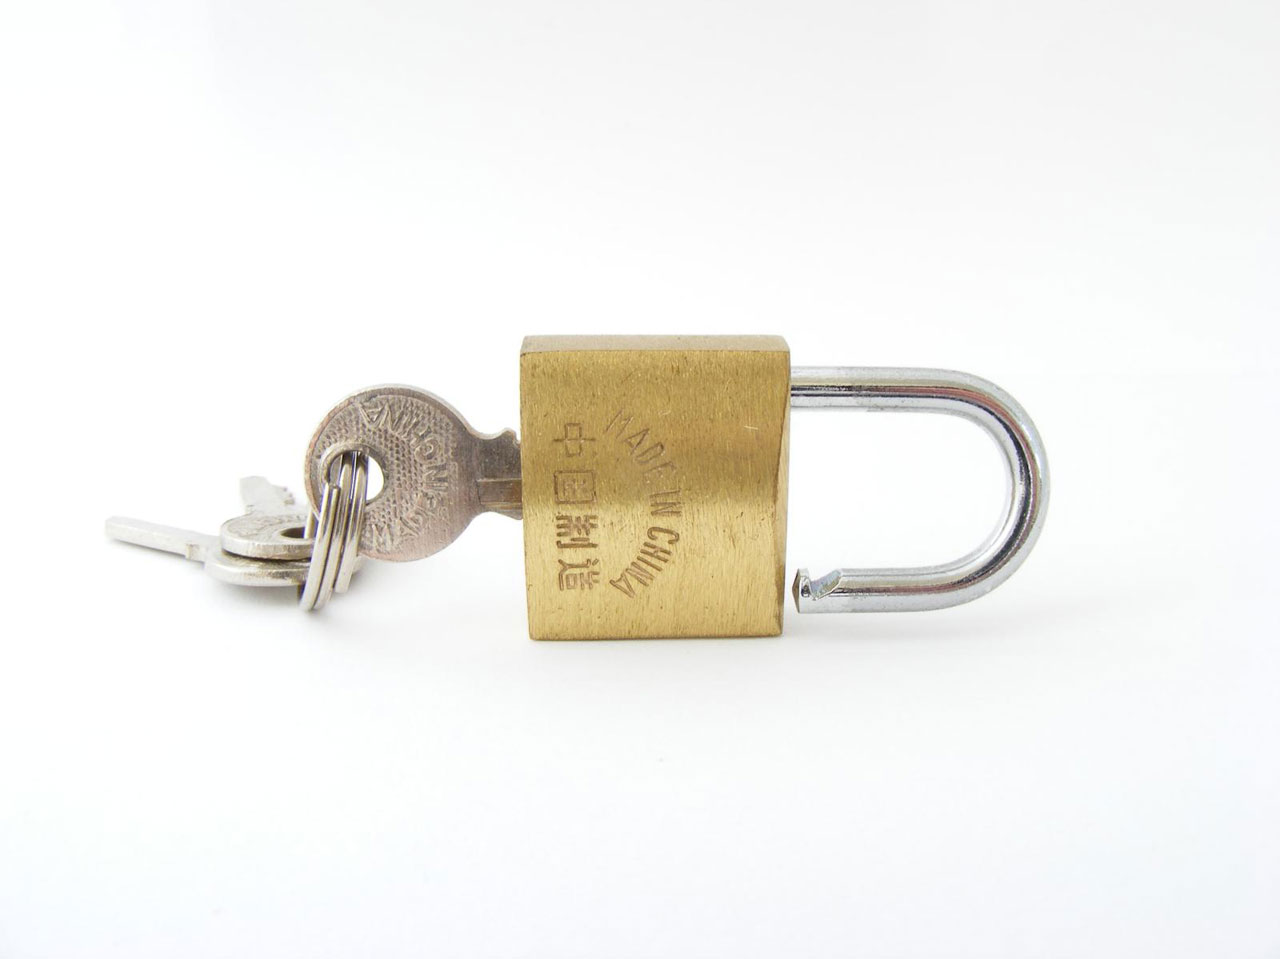 A key is inserted into a gold padlock against a white background.